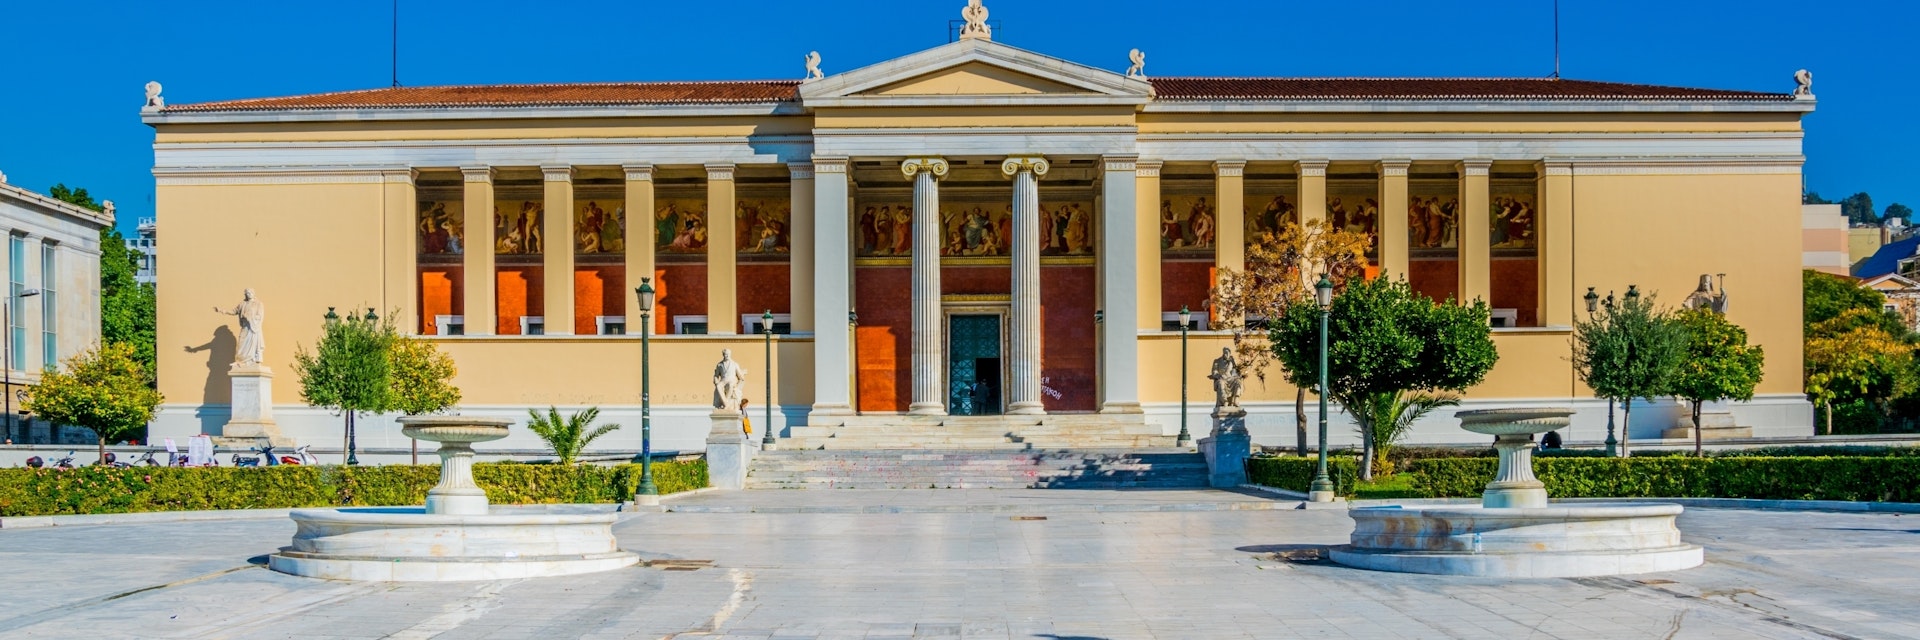 Building of the National & Kapodistrian University of Athens in Panepistimio is one of the landmarks of Athens; Shutterstock ID 407977351; your: Erin Lenczycki; gl: 65050; netsuite: Digital; full: POI
407977351